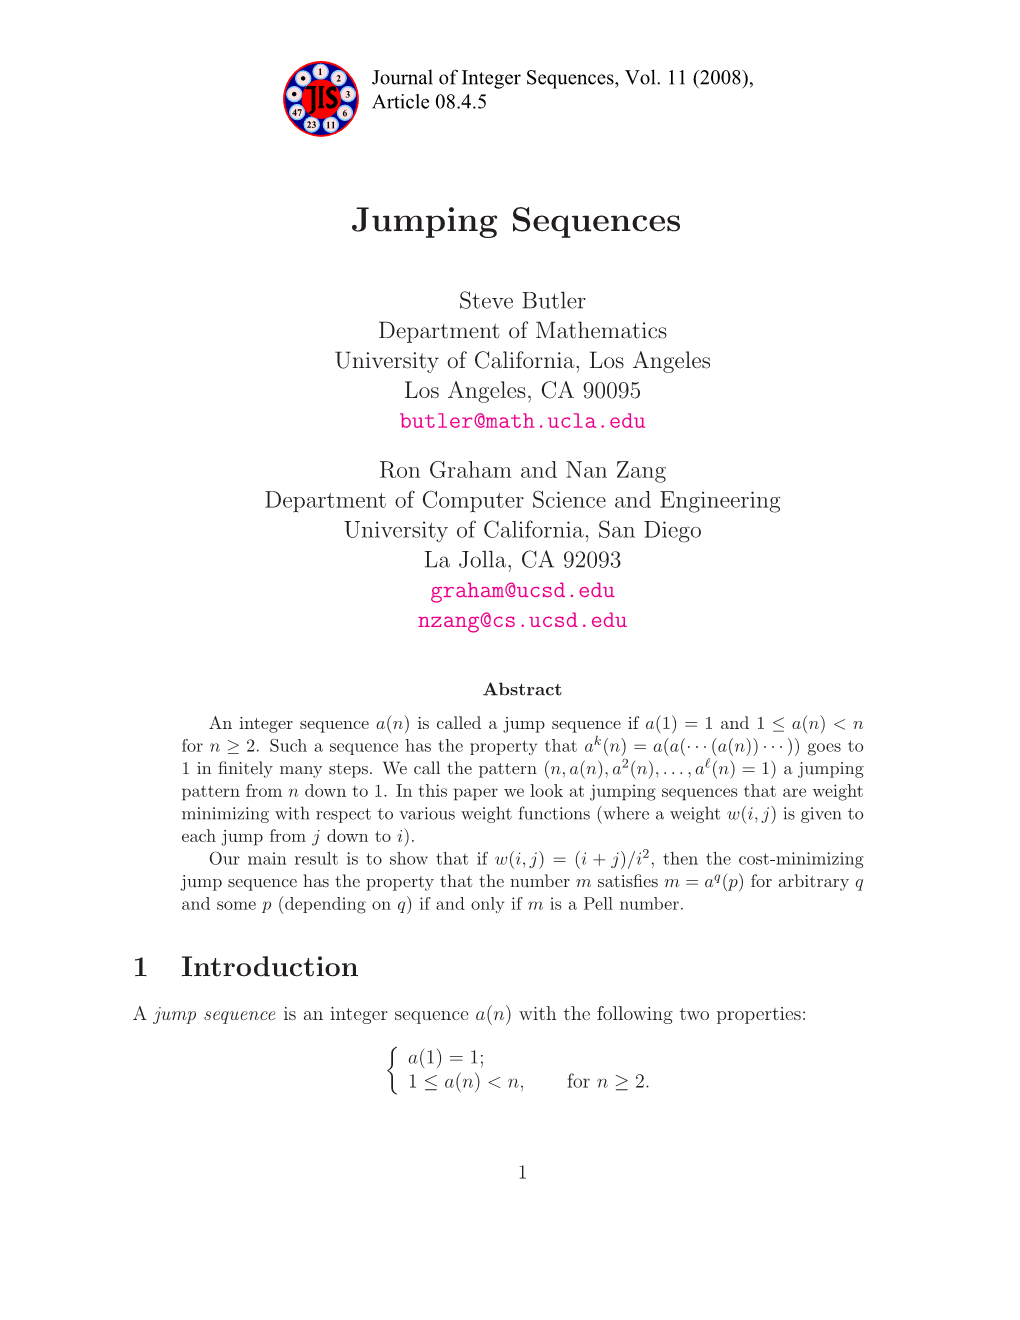 Jumping Sequences